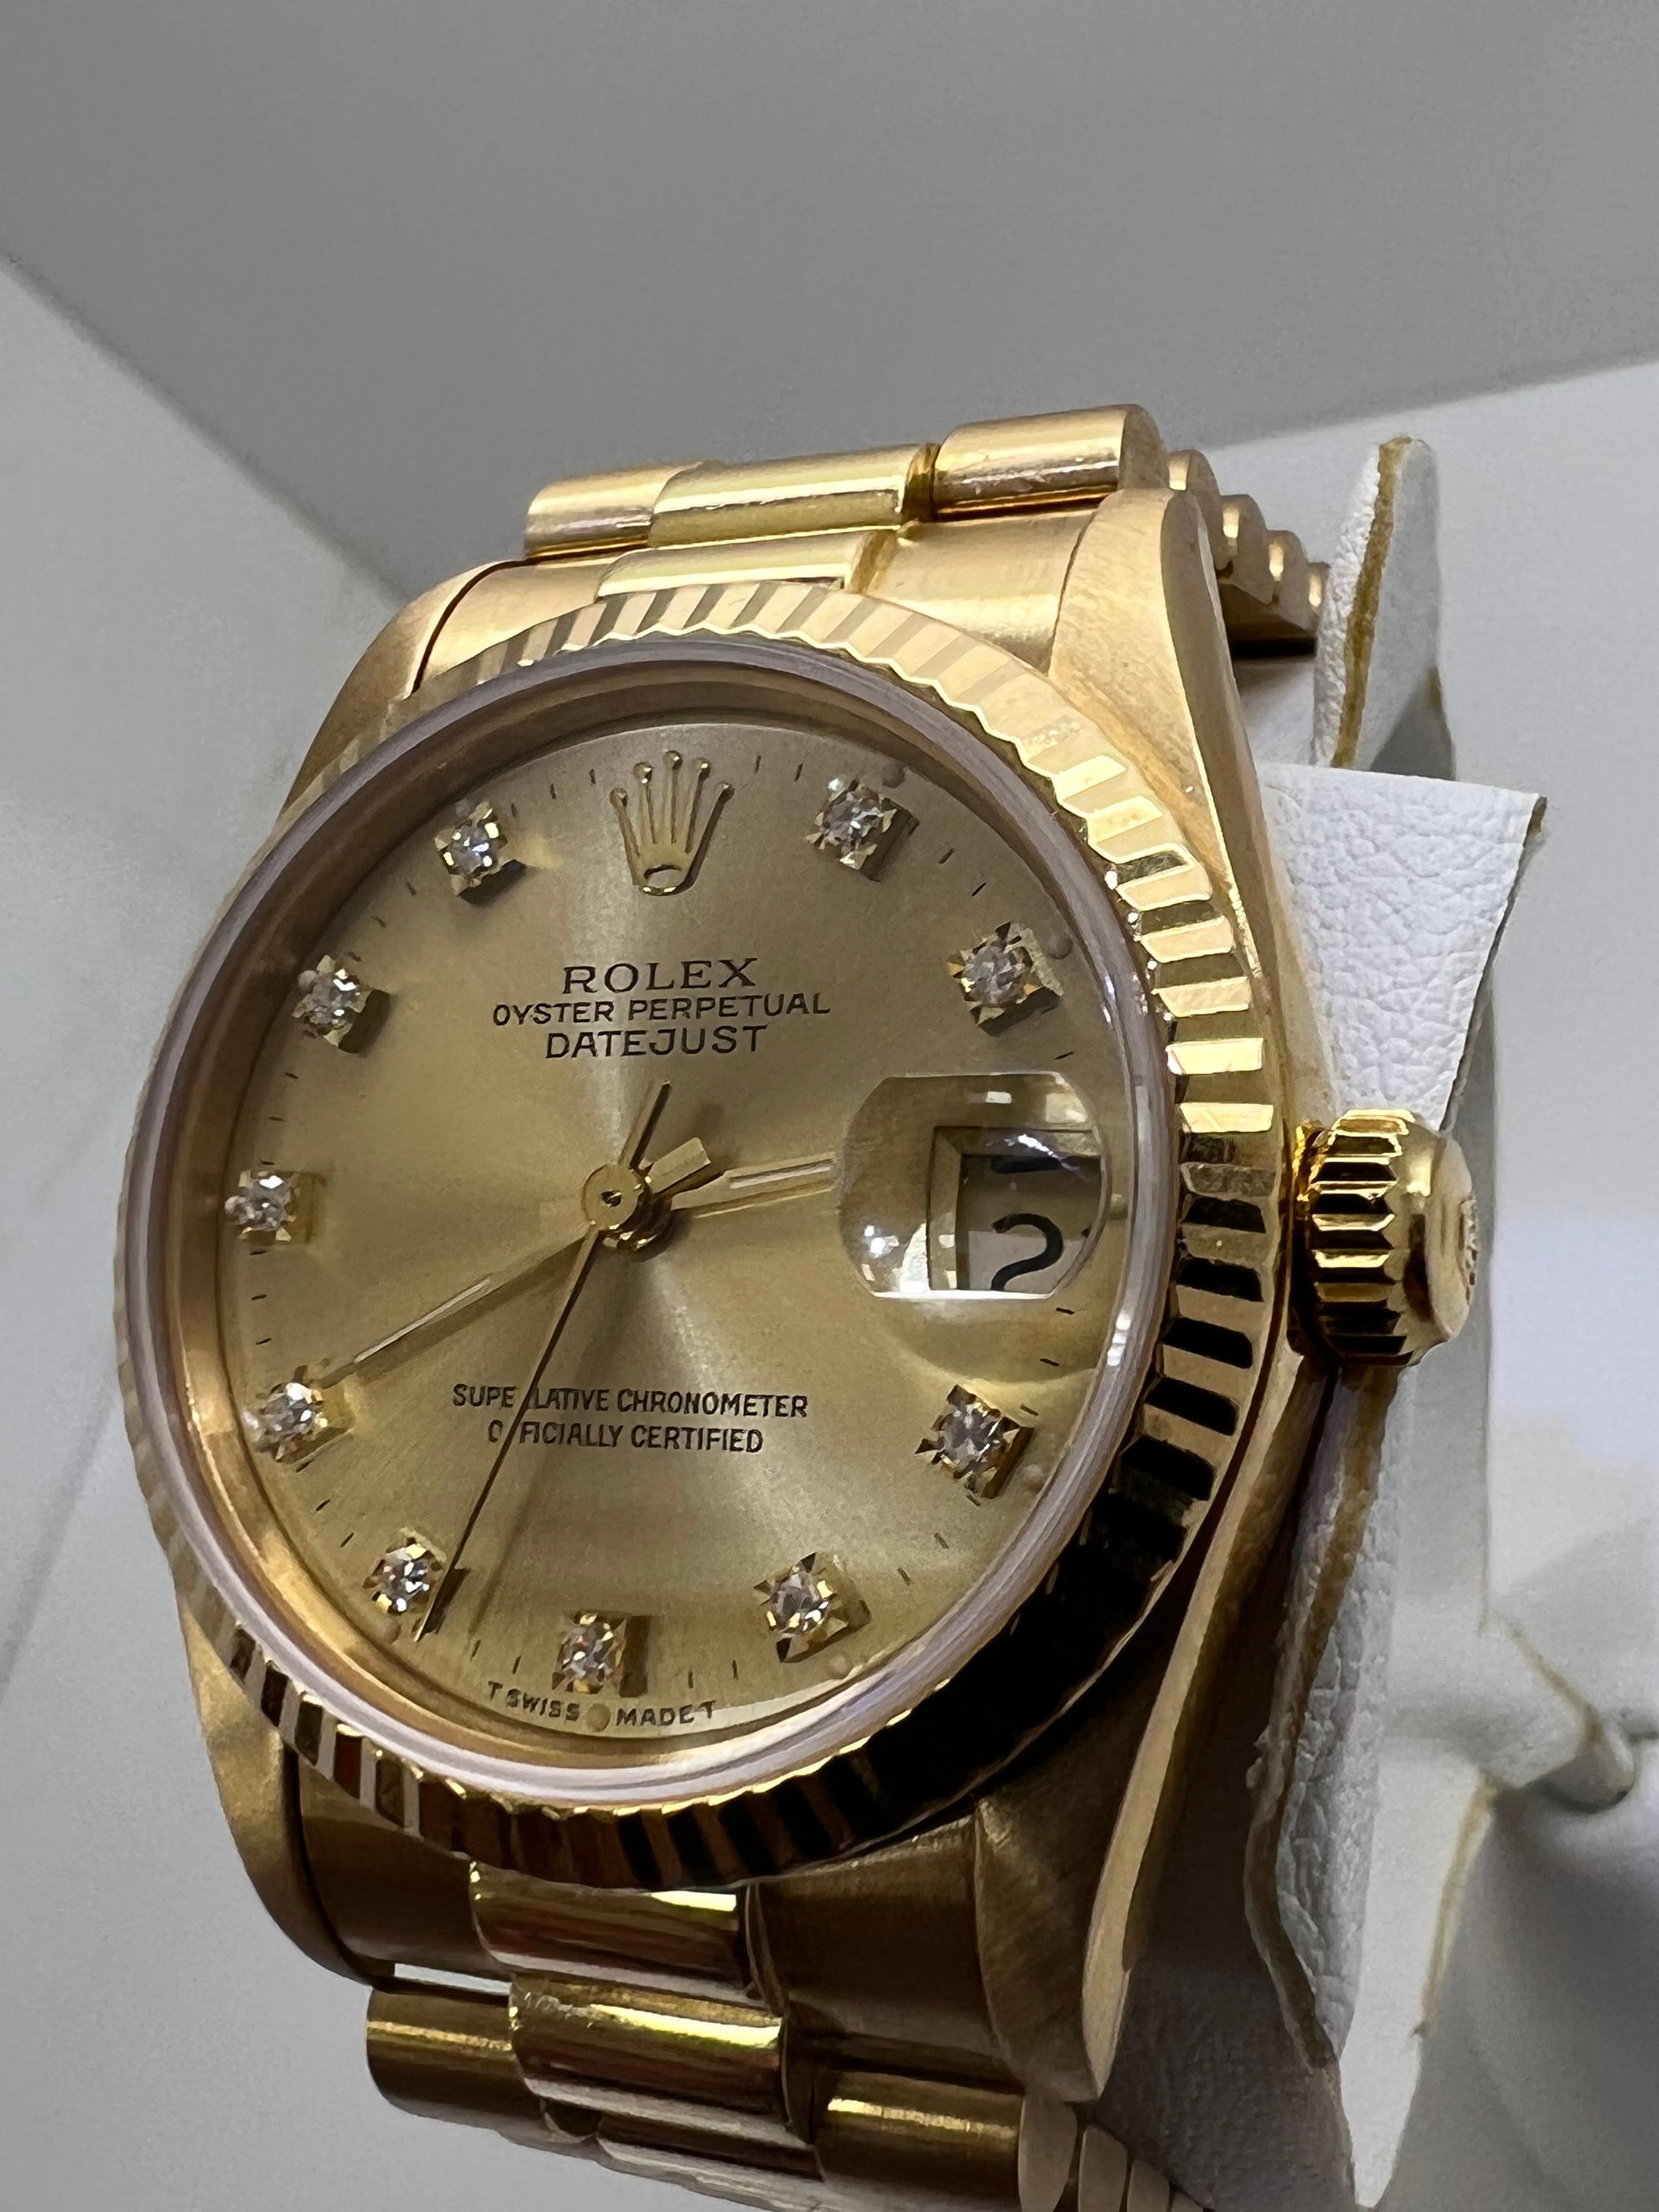 Rolex Ladies 31mm DateJust Gold Diamond Dial

excellent condition

This watch is 100% all original Rolex

Original Rolex Box & Booklets 

Shop With Confidence 

5 Year Warranty
